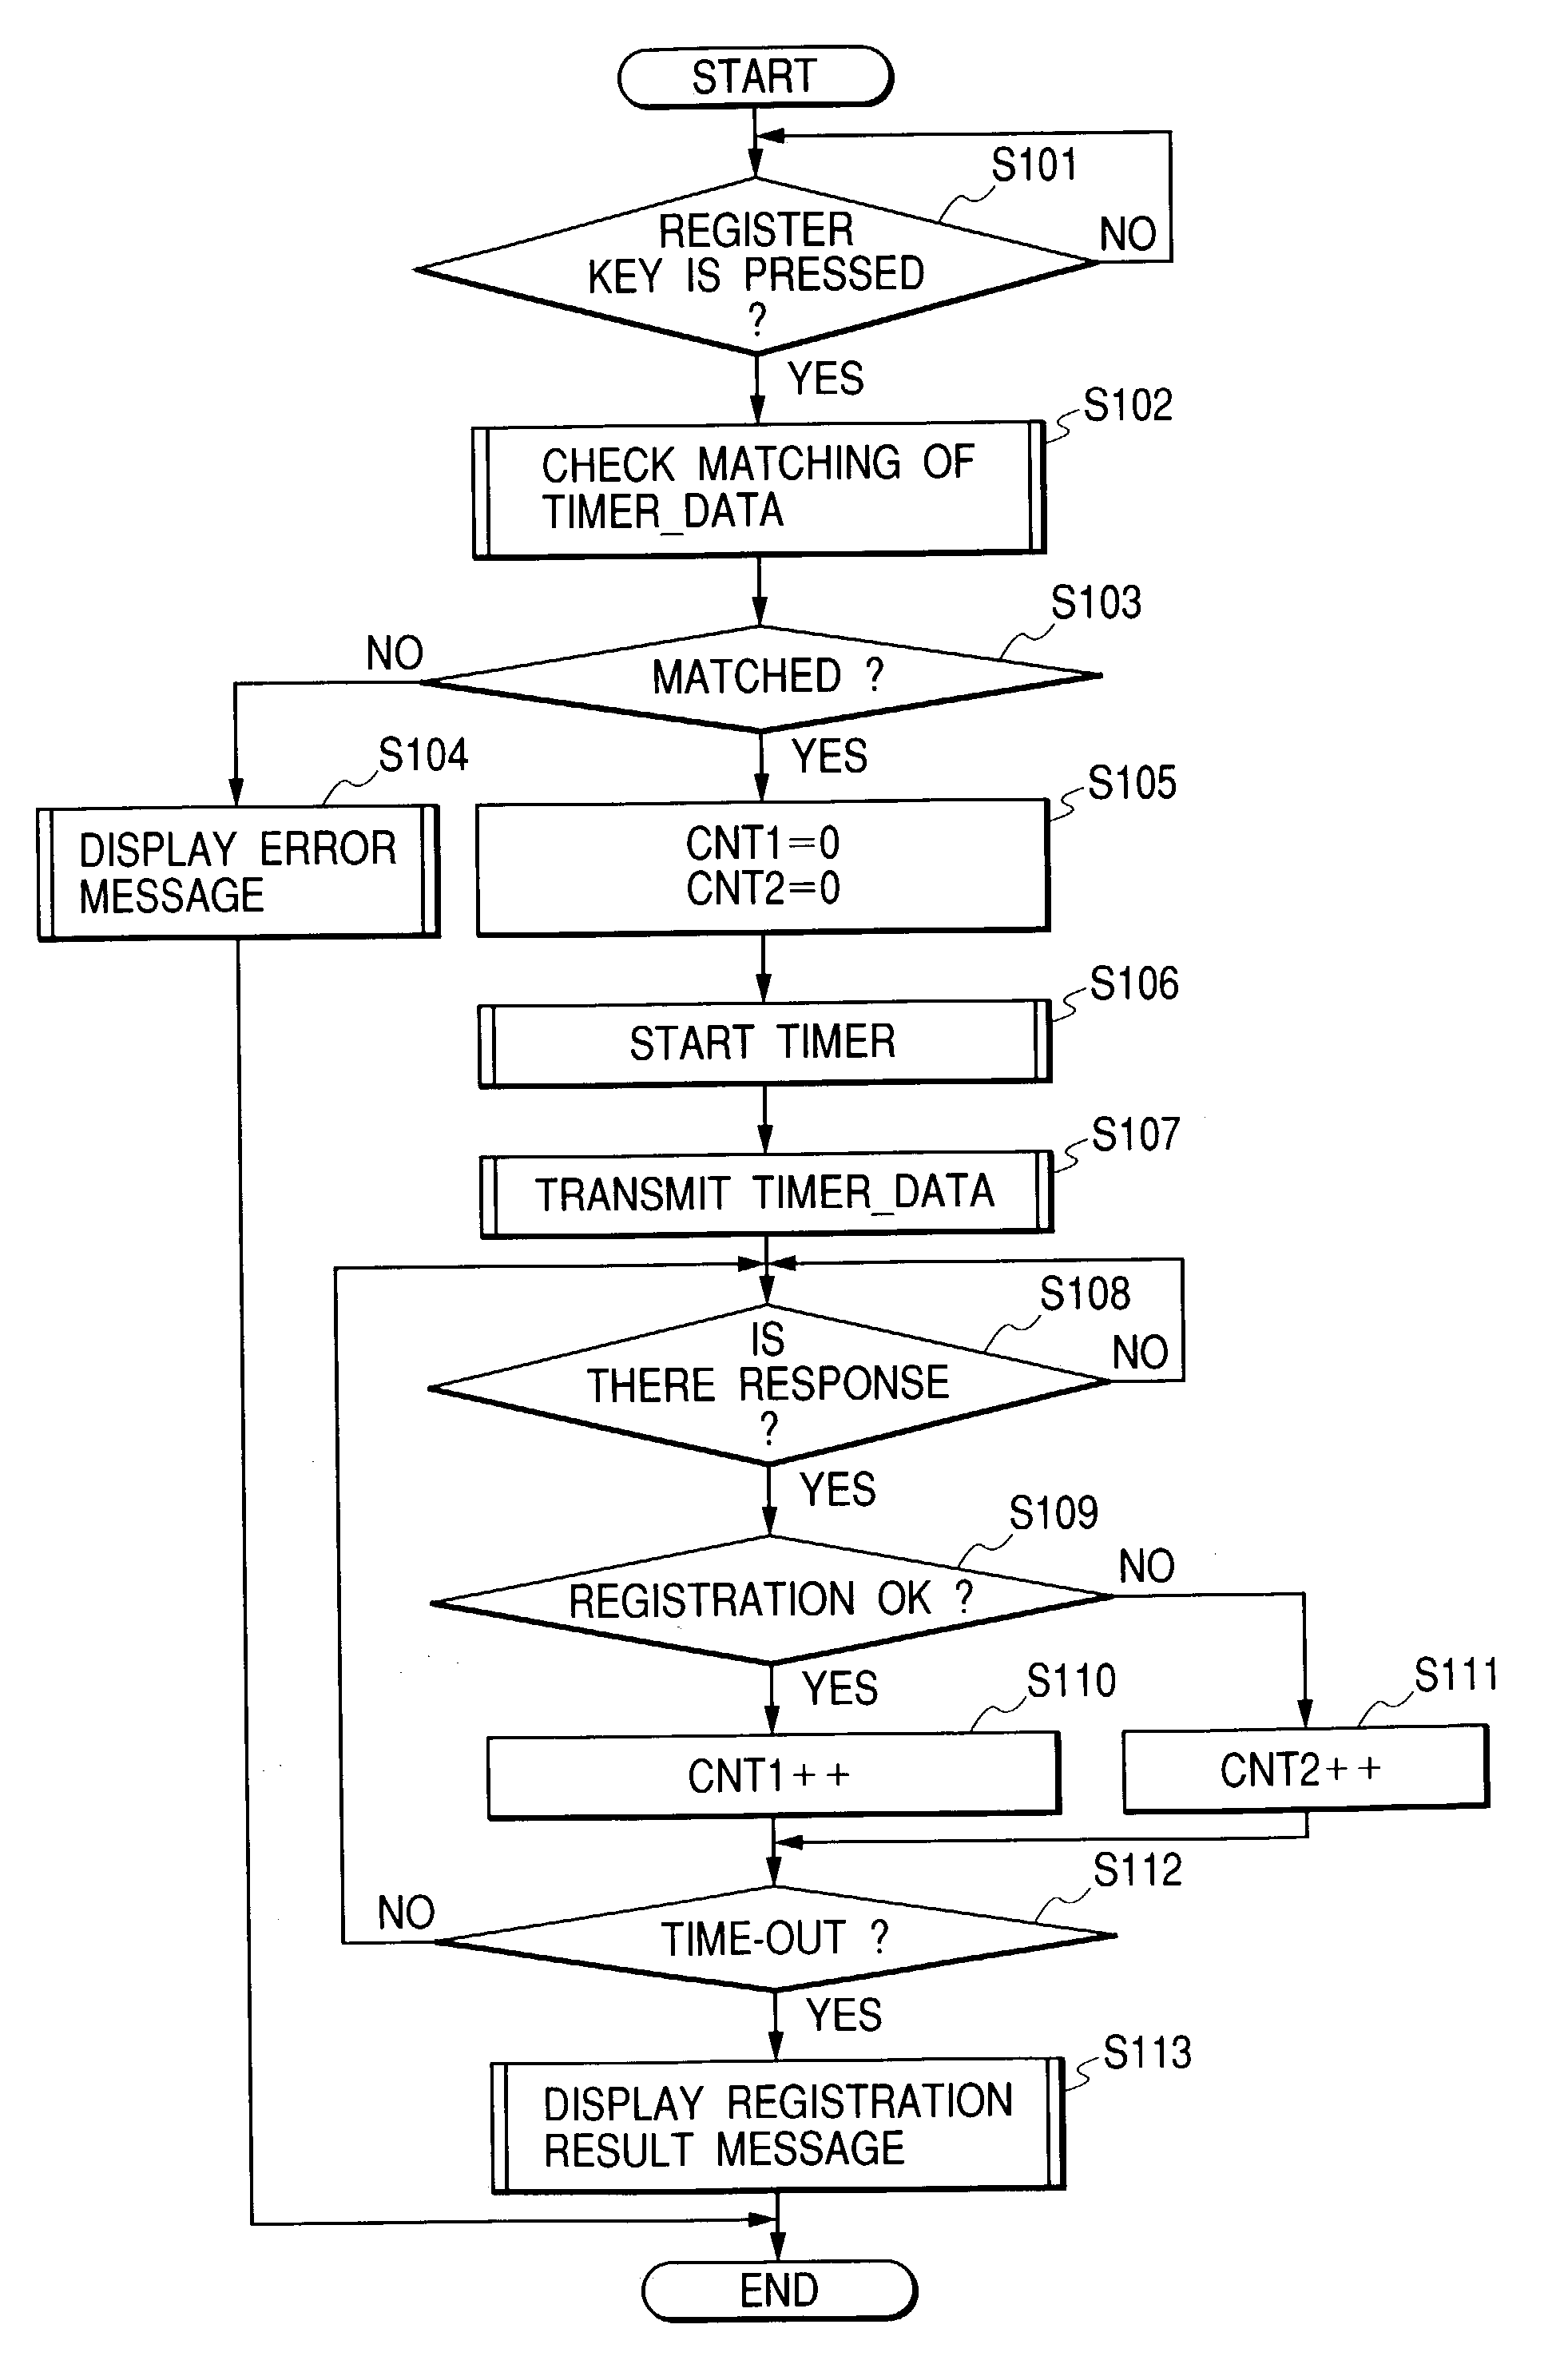 Power saving management system and power saving managing method for forwarding an updated power mode shift time to a plurality of output apparatuses over a network